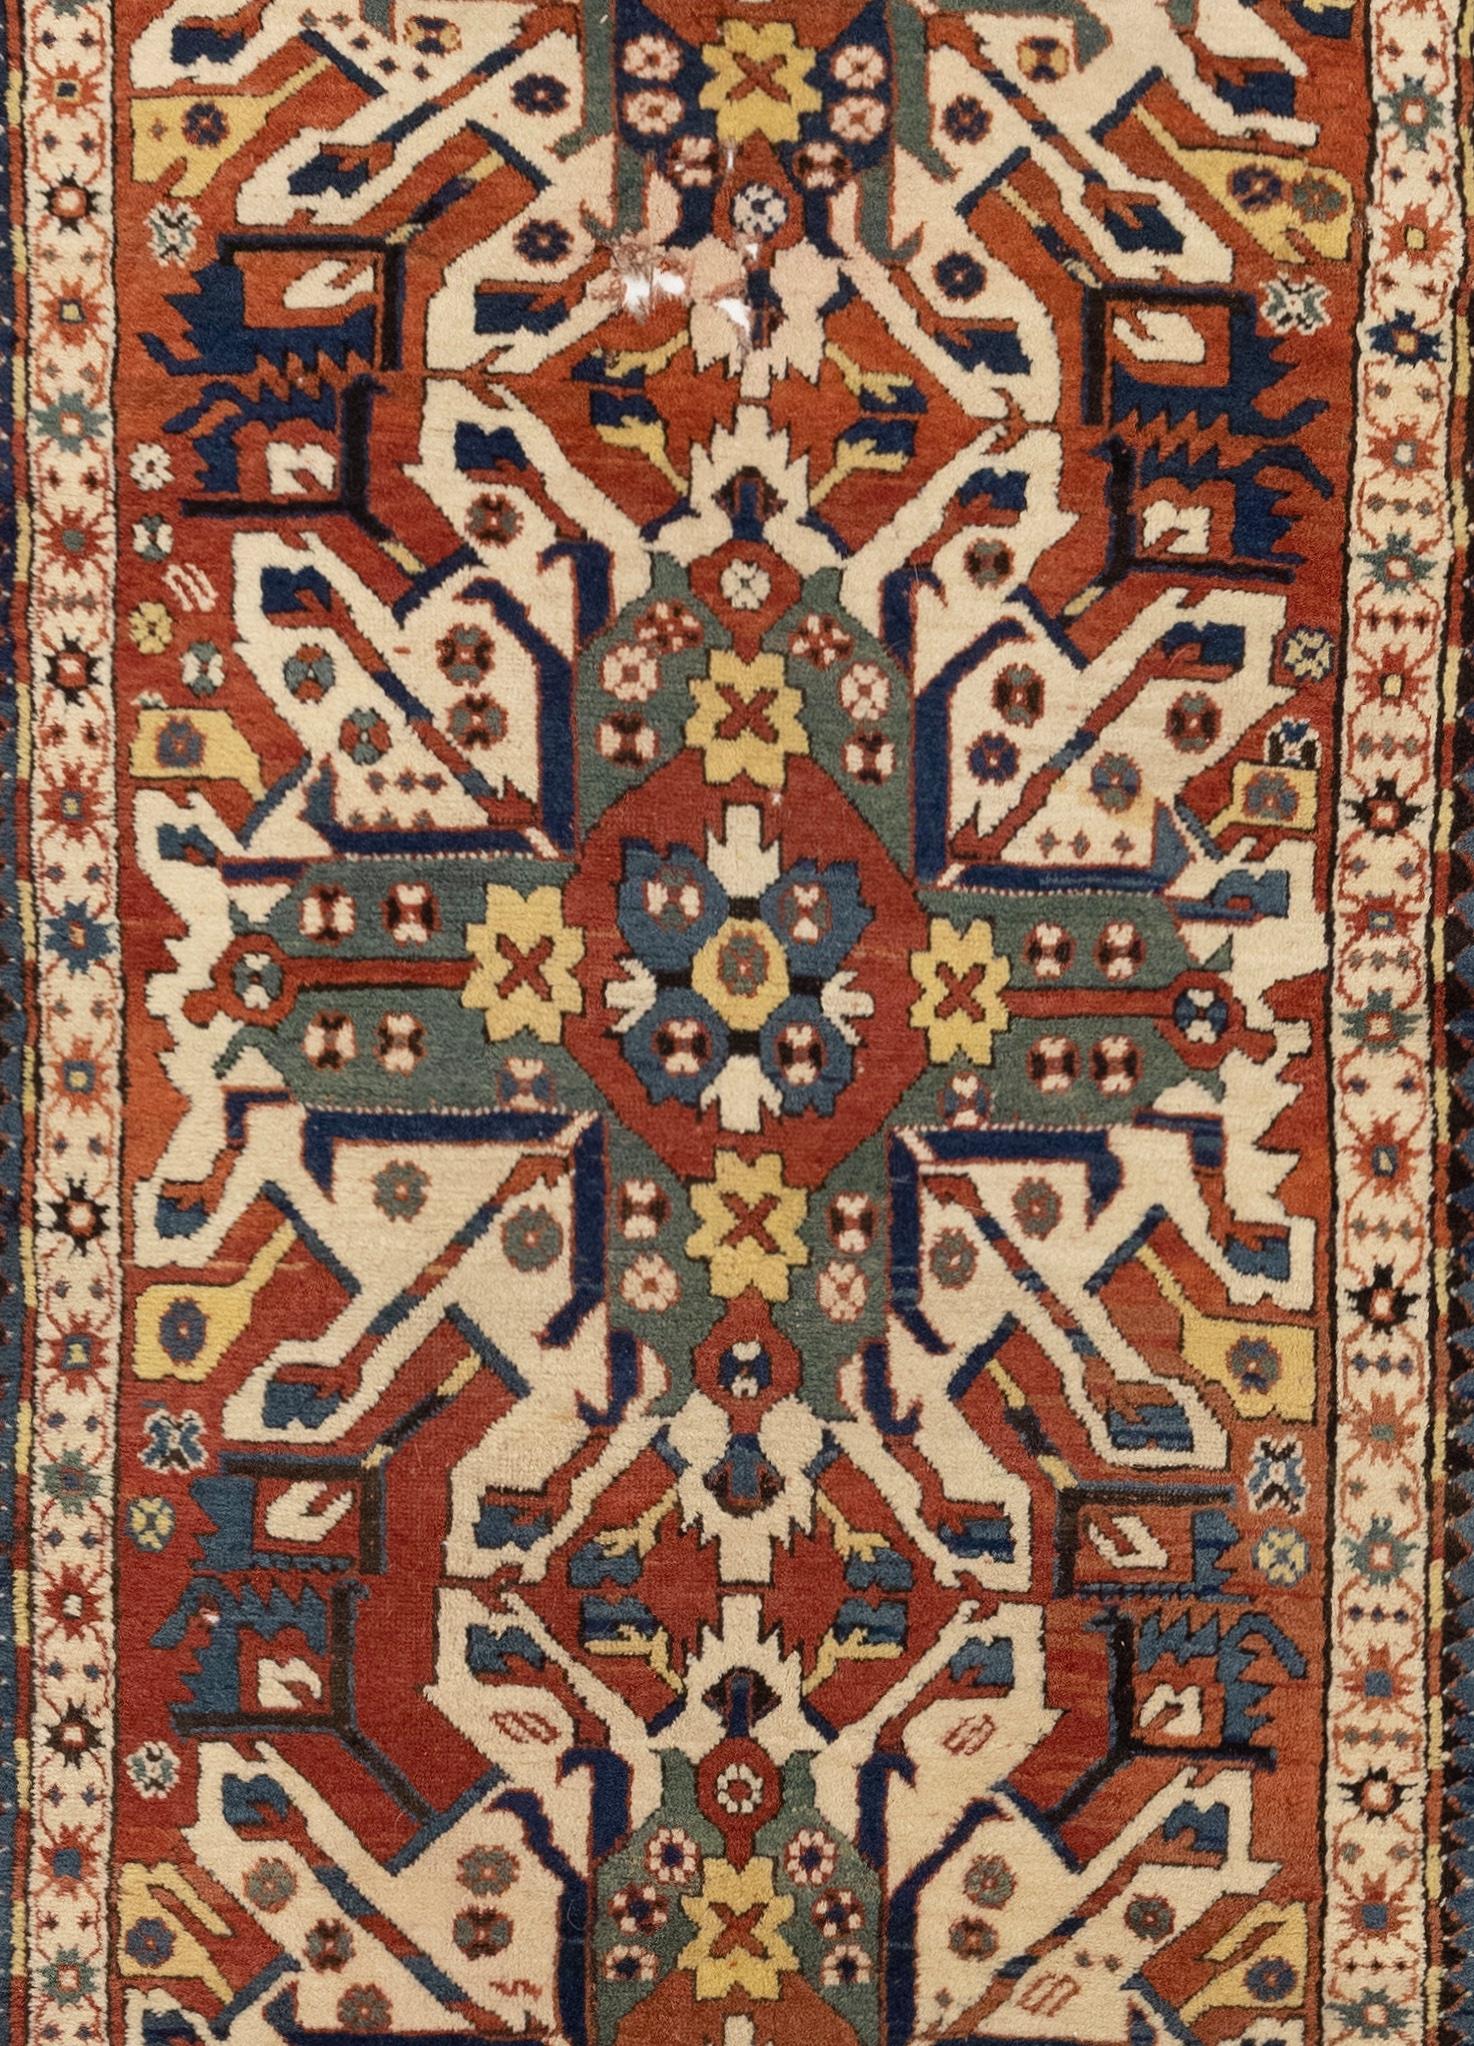 The antique caucasian eagle kazak rug is a handwoven textile that originates from the Caucasus region, located between the black and caspian Seas. This type of rug is highly valued by collectors for its intricate design and exceptional